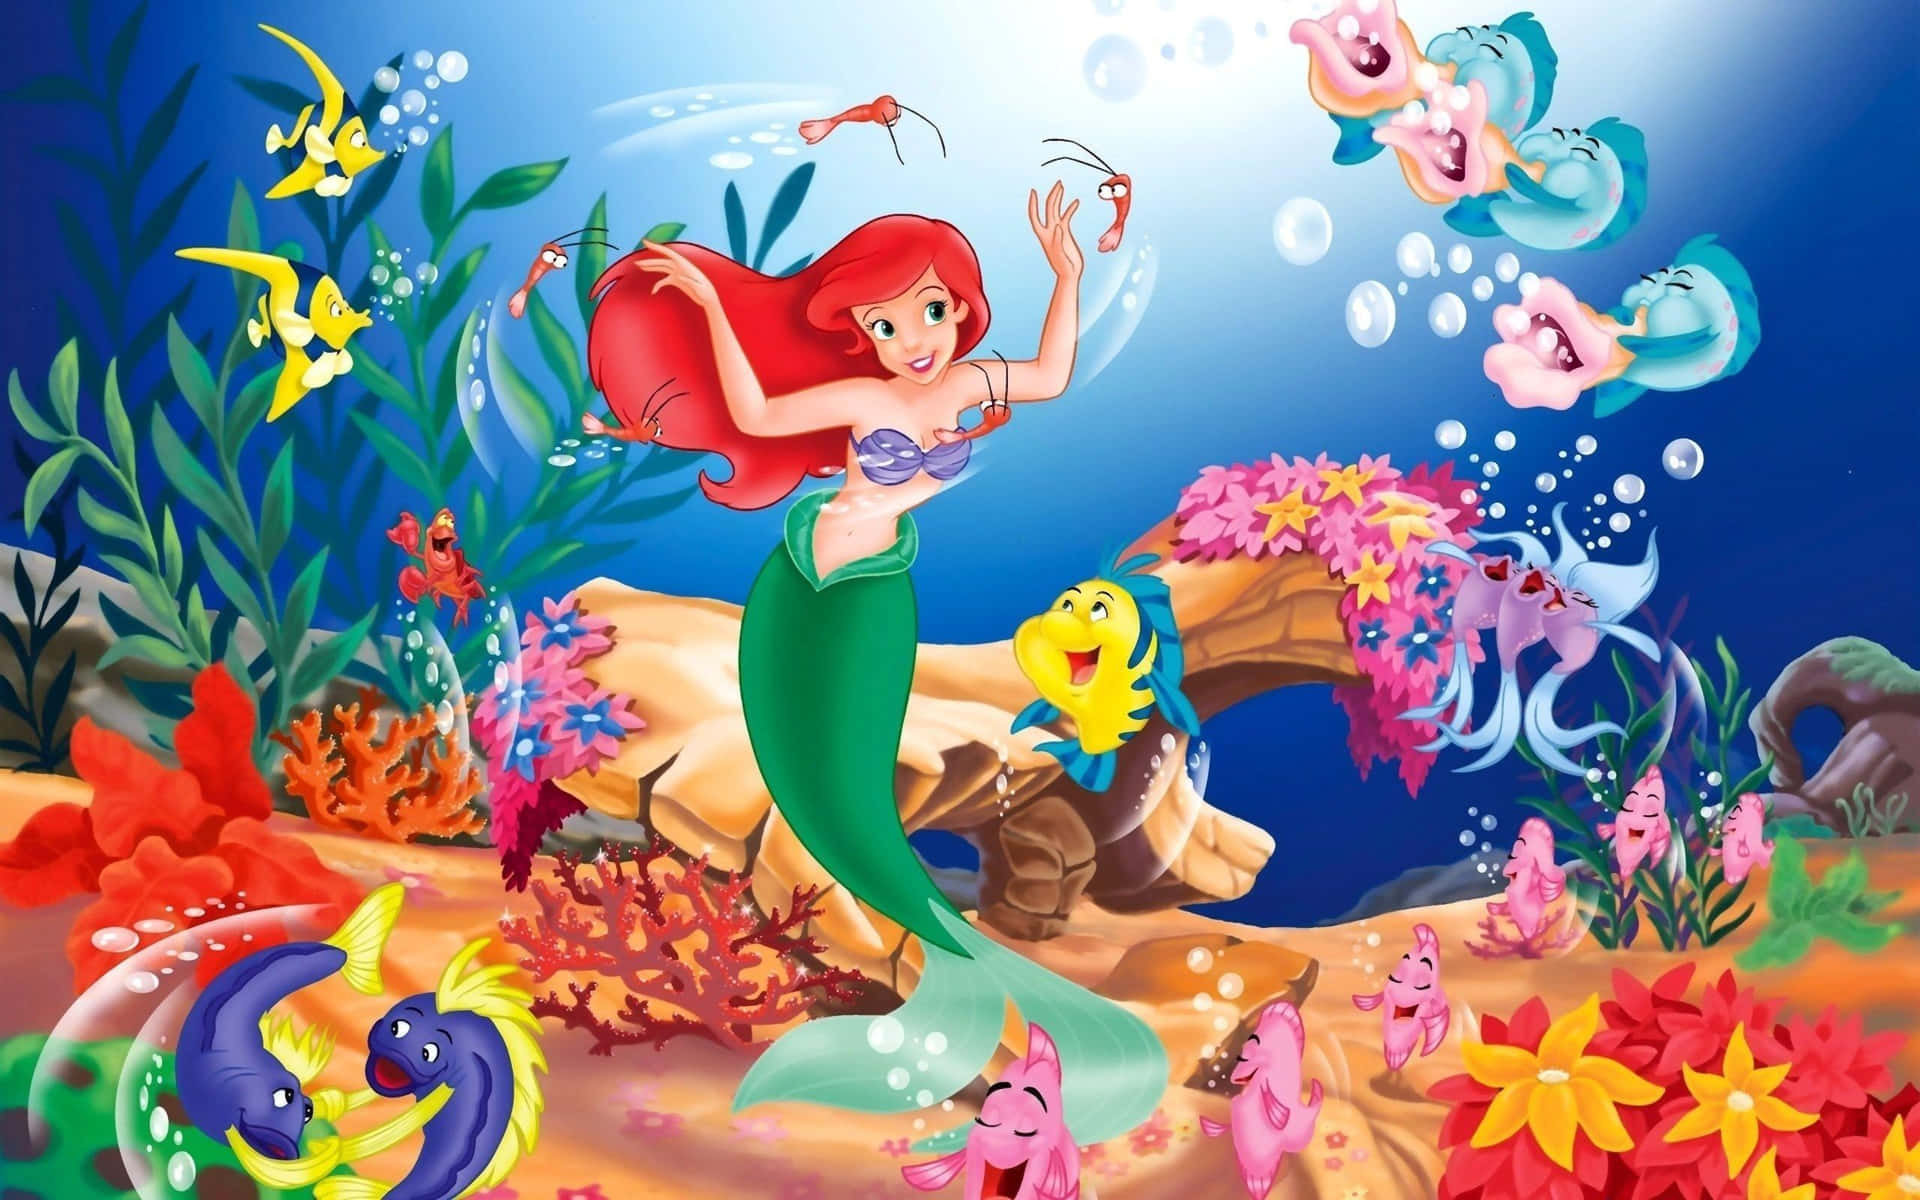 Ariel the Little Mermaid Saves The Day